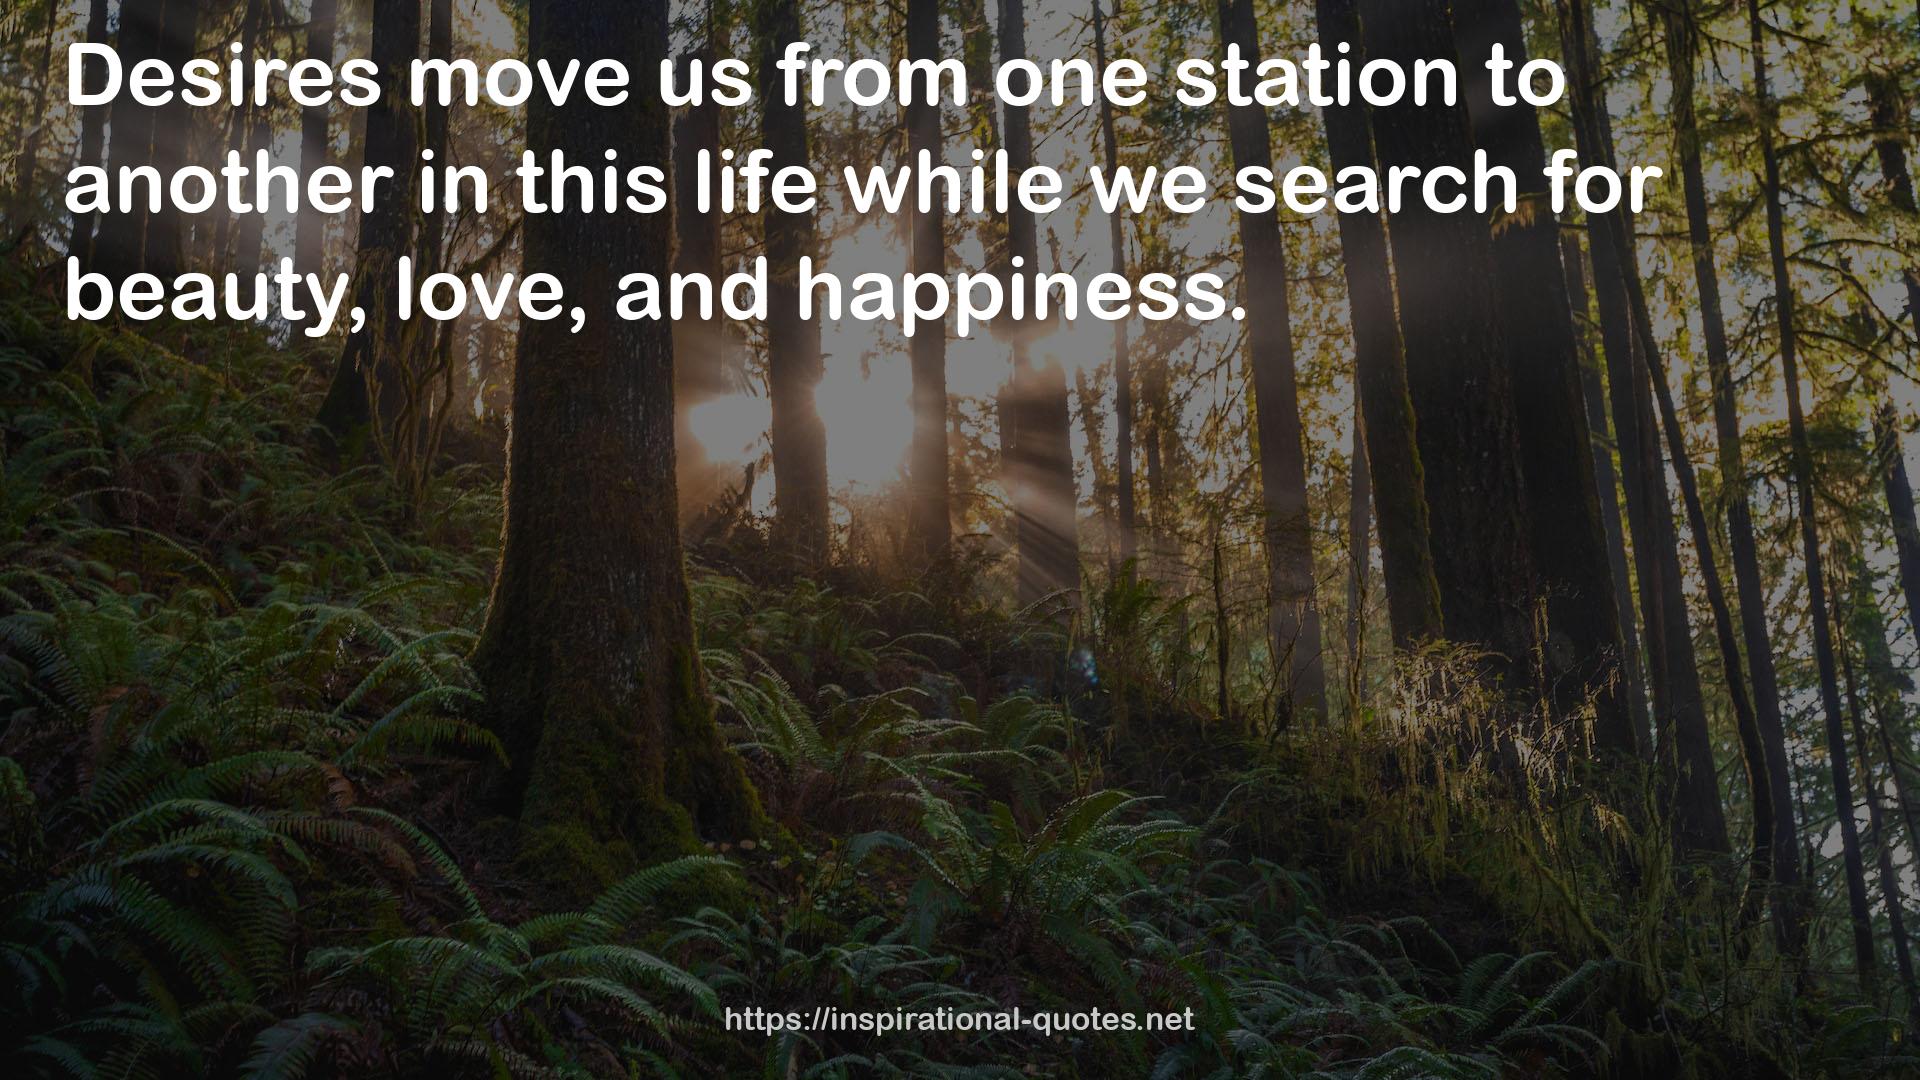 one station  QUOTES